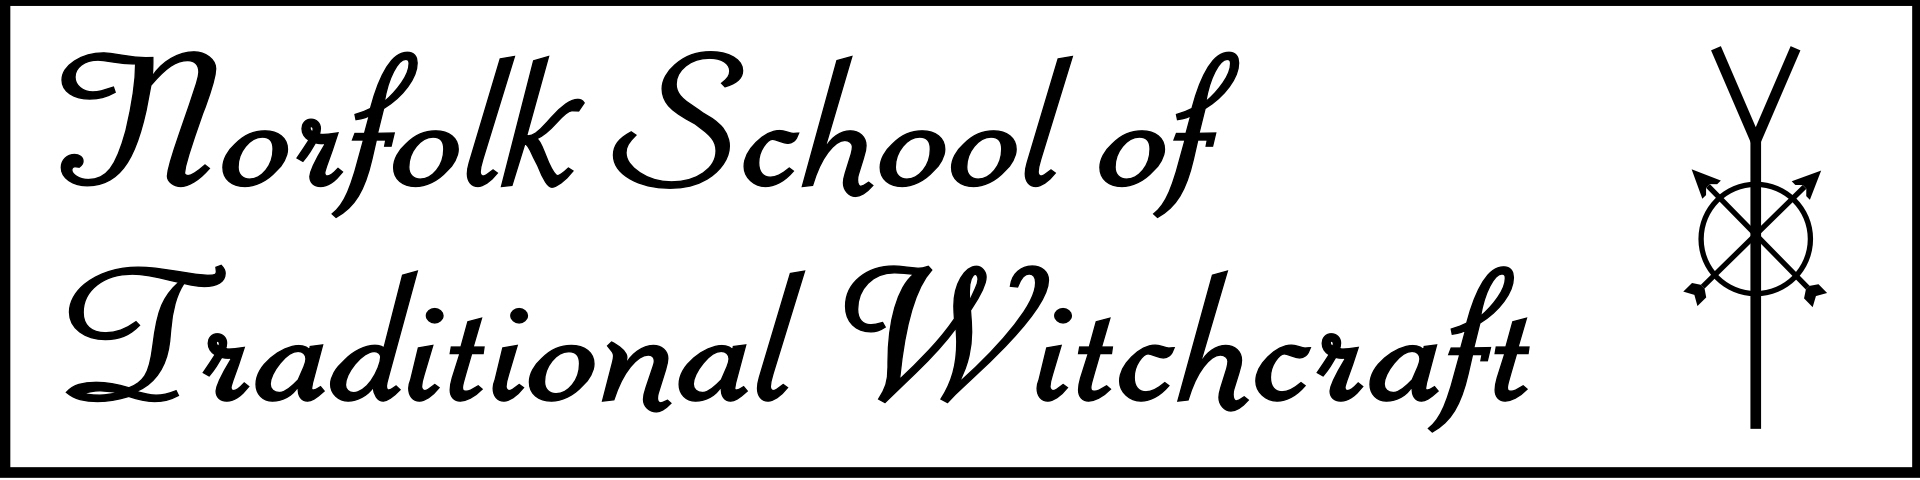 Link to the Norfolk School of Traditional Witchcraft